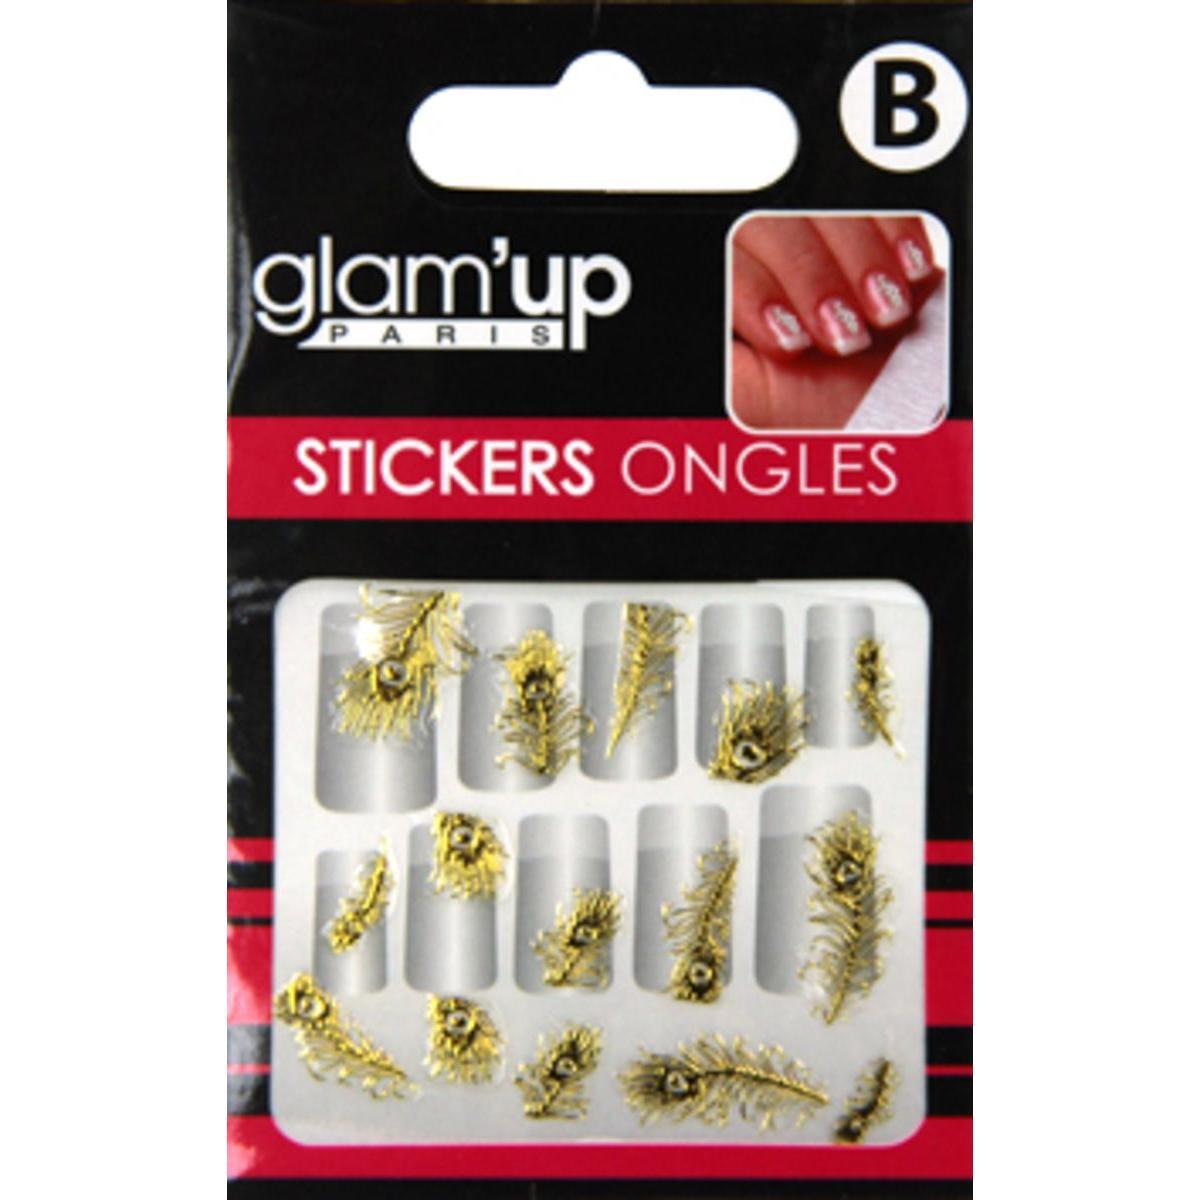 Sticker ongles plumes paon or